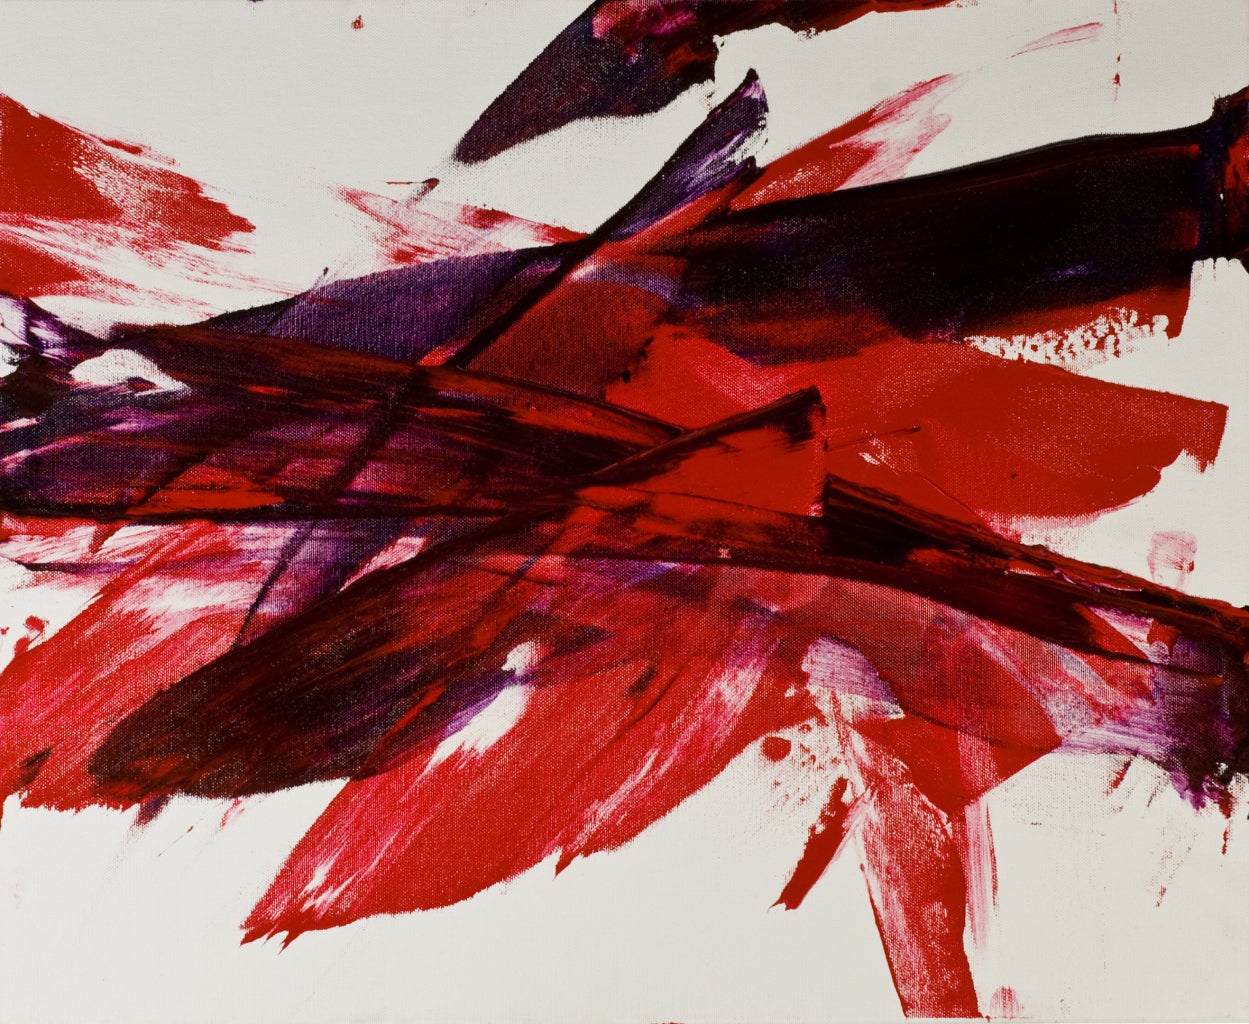 Luis Feito López Abstract Painting - Luis Feito, Abstract Red and Black, Oil on canvas, 2569